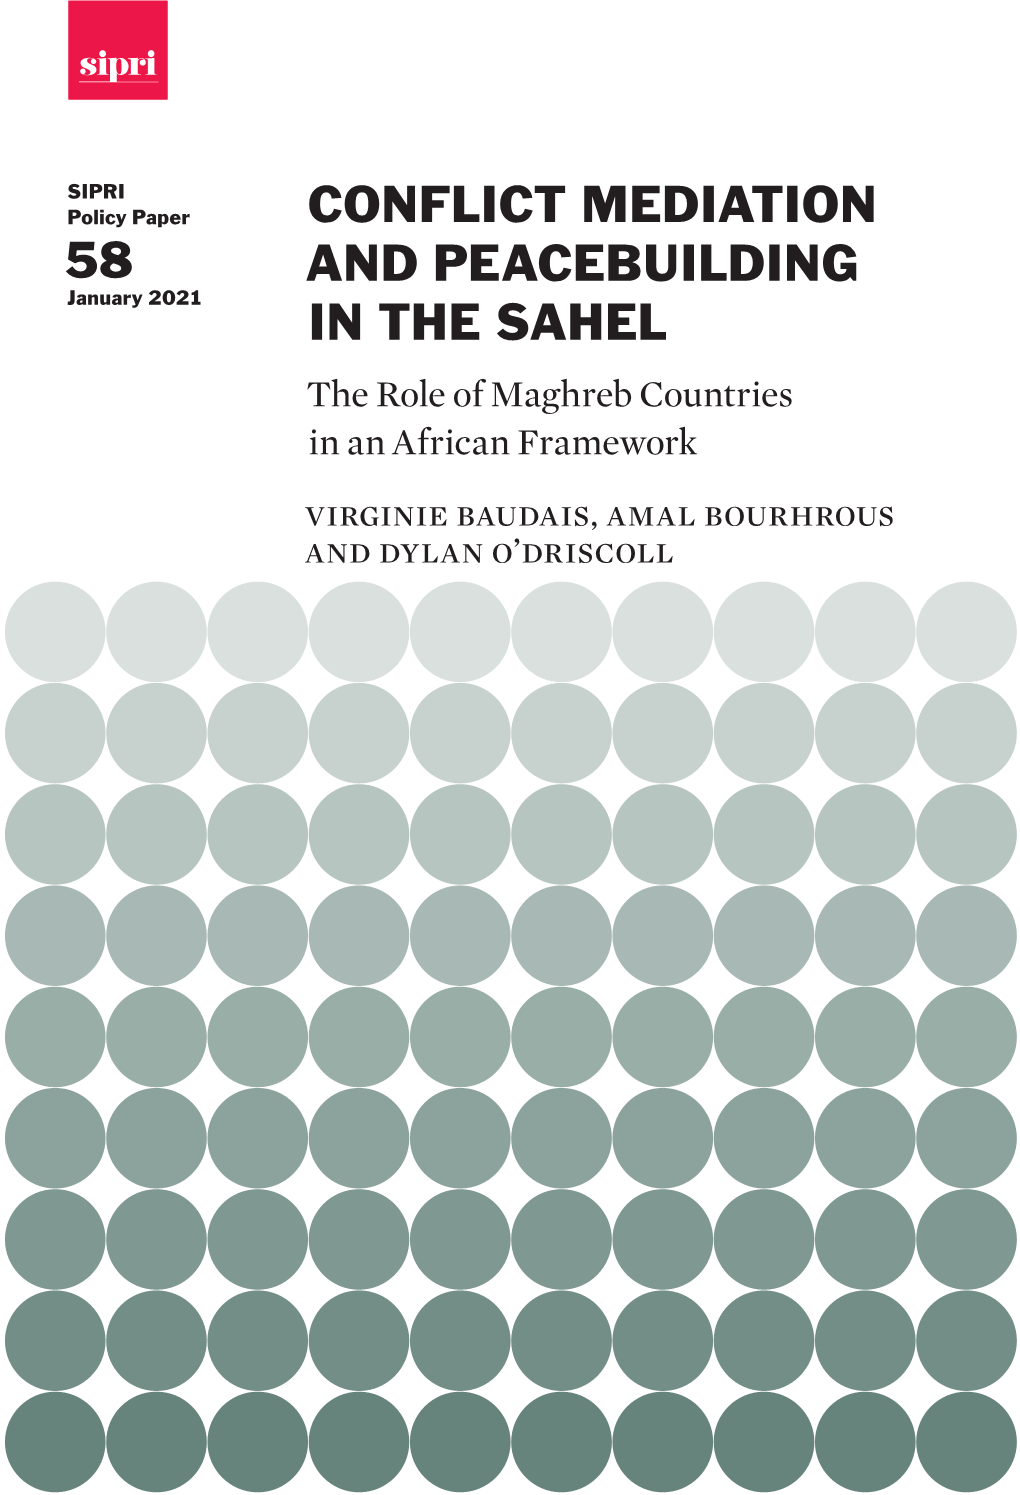 Conflict Mediation and Peacebuilding in the Sahel